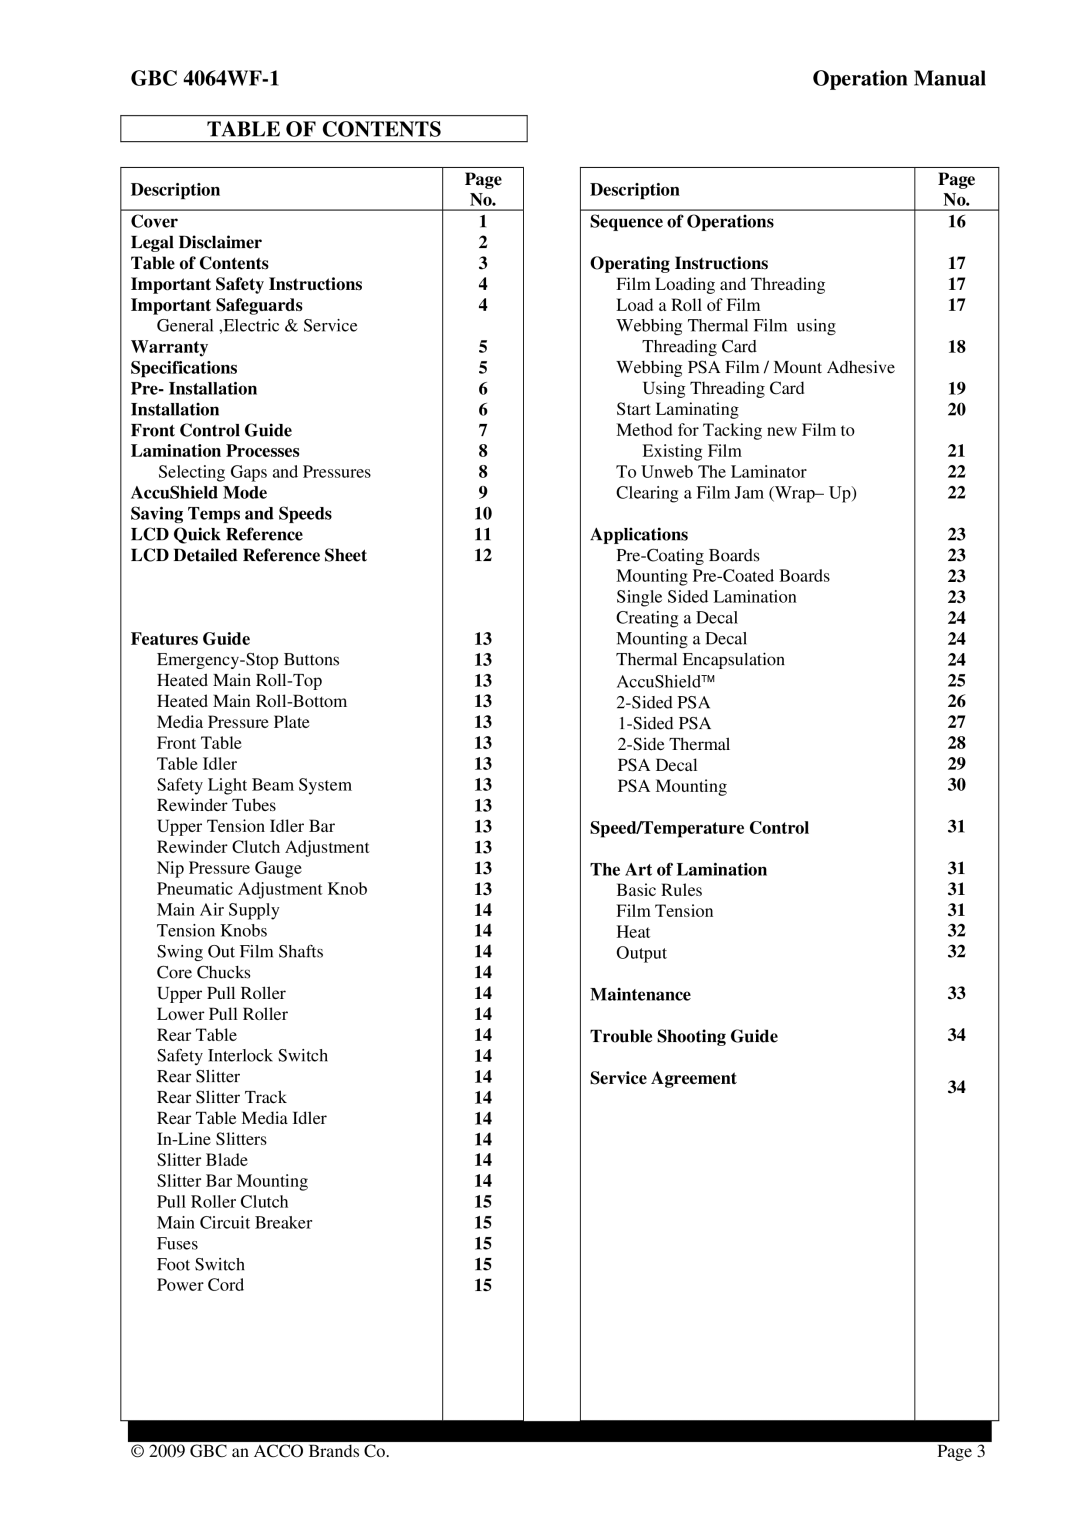 GBC 4064WF-1 operation manual Table of Contents 